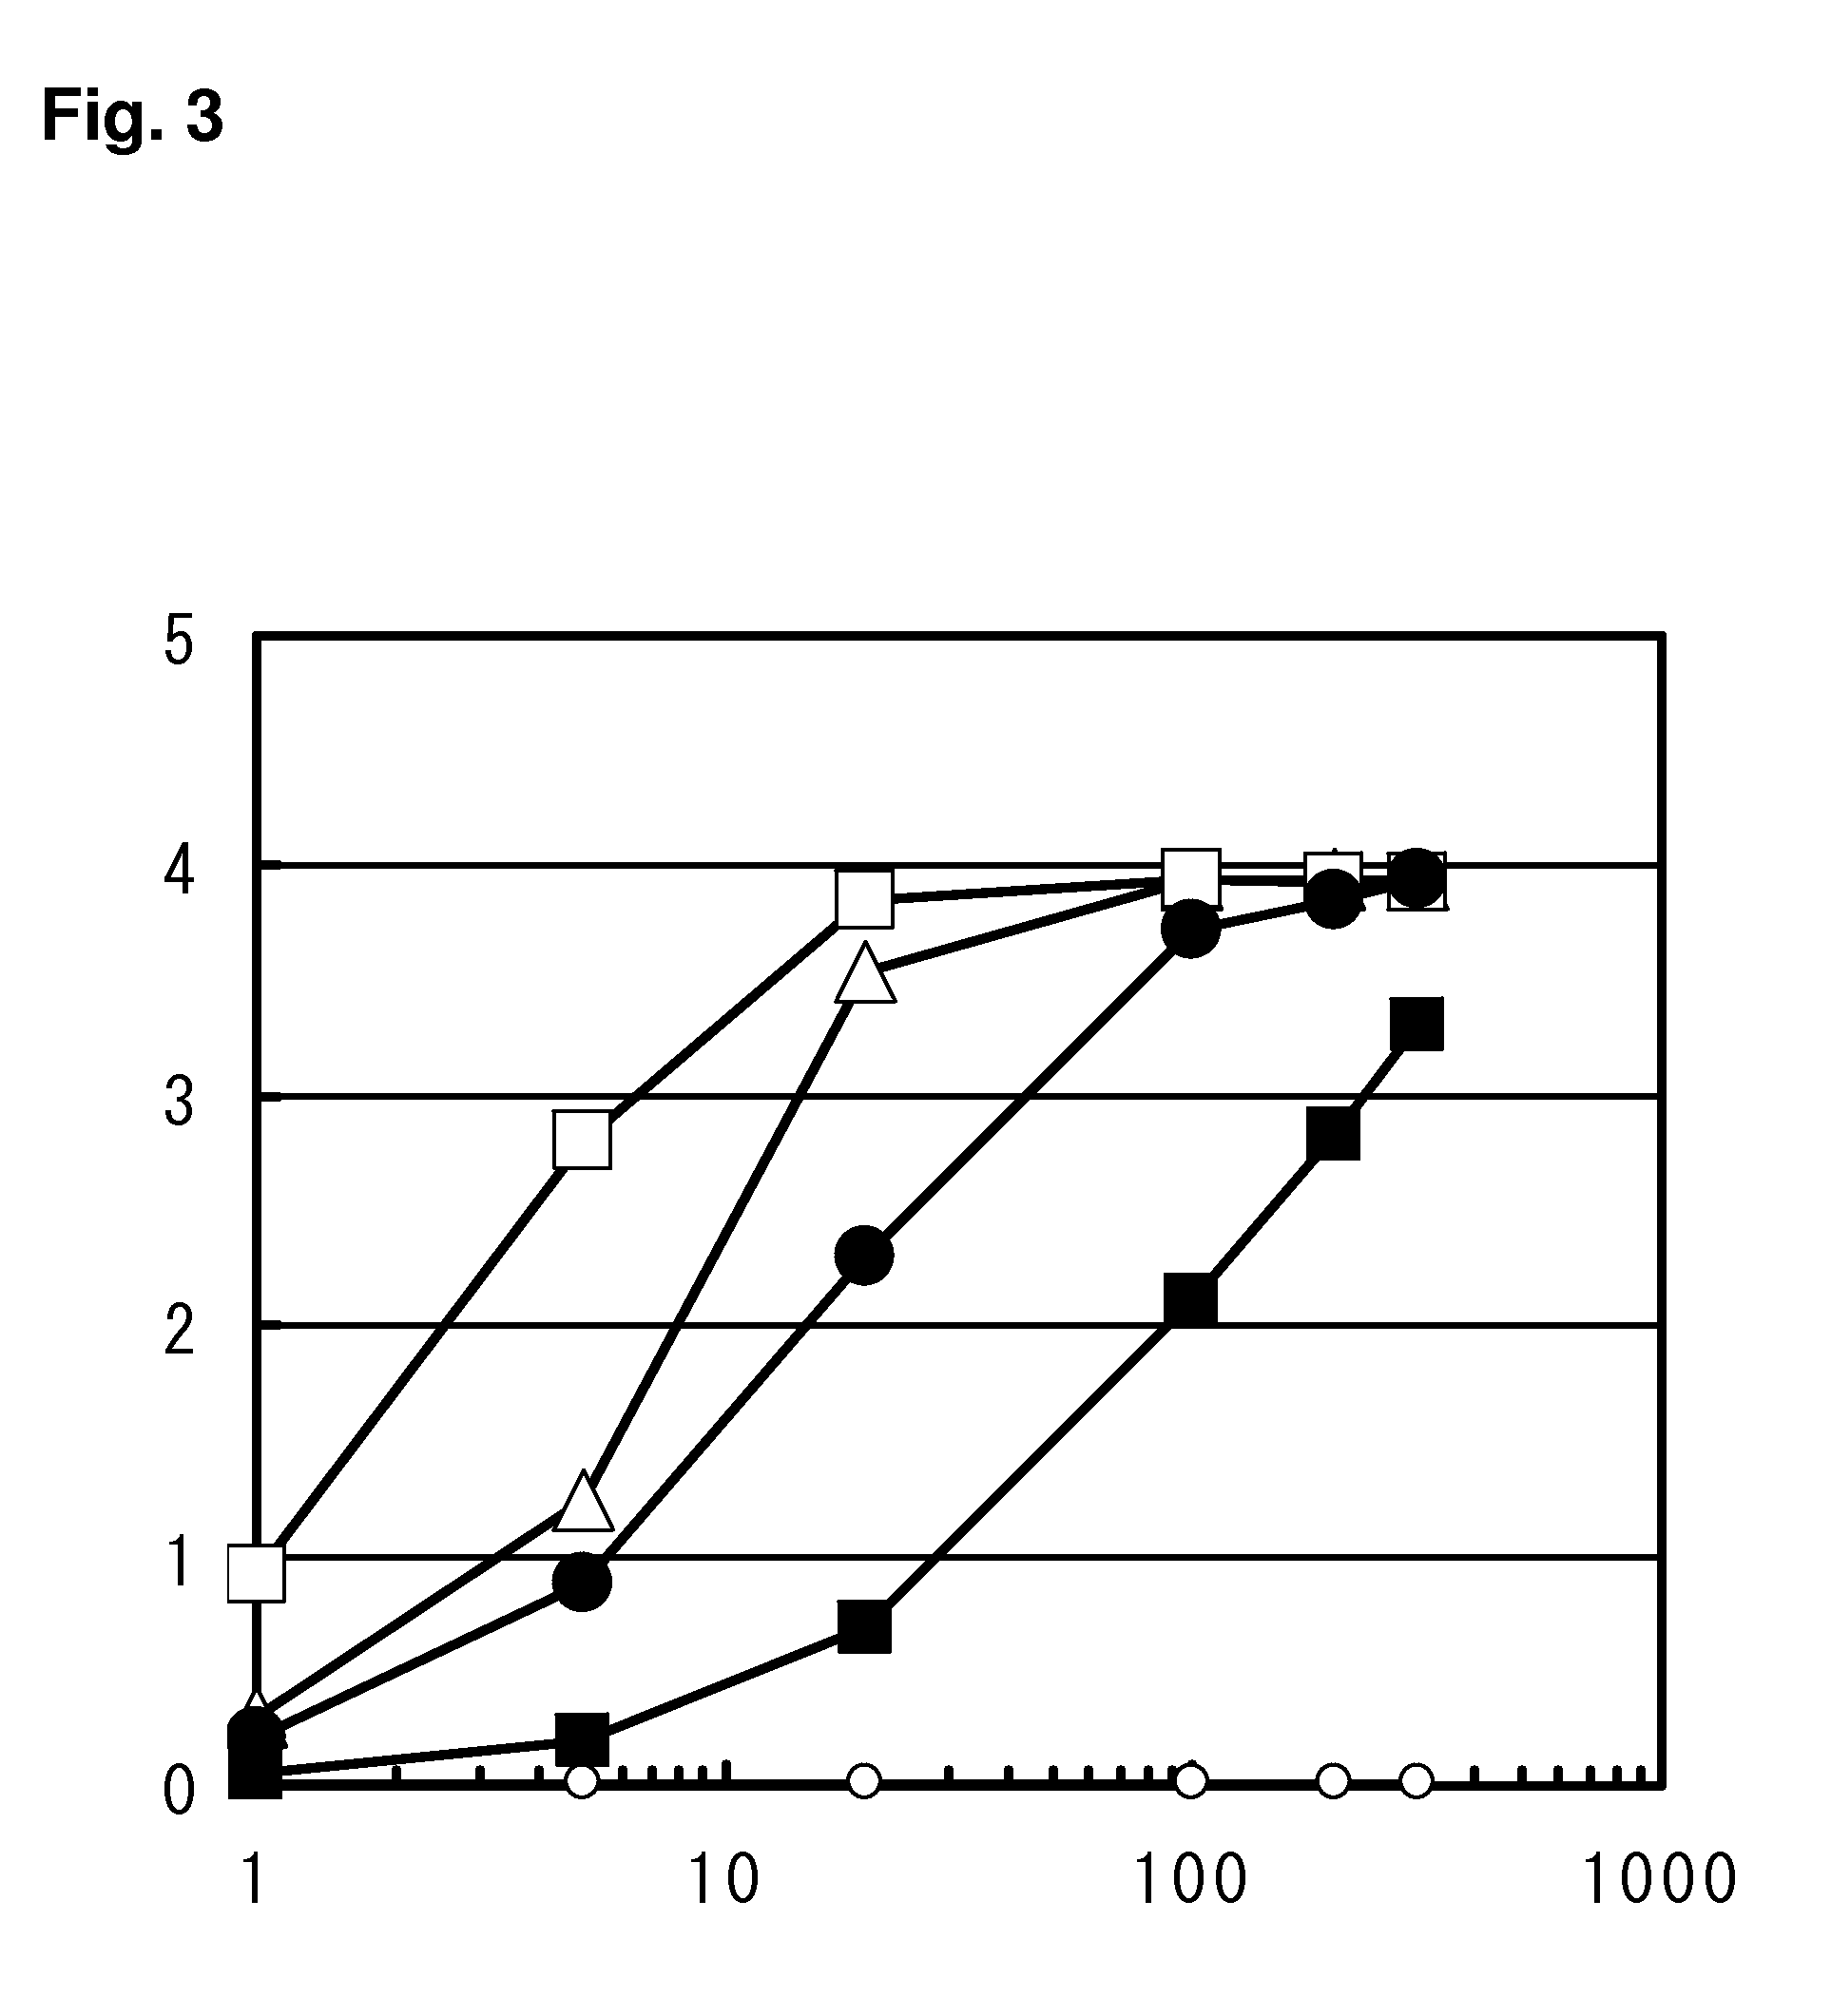 Pharmaceutical agent comprising Anti-bmp9 antibody as active ingredient for treatment of anemia such as renal anemia and cancer anemia